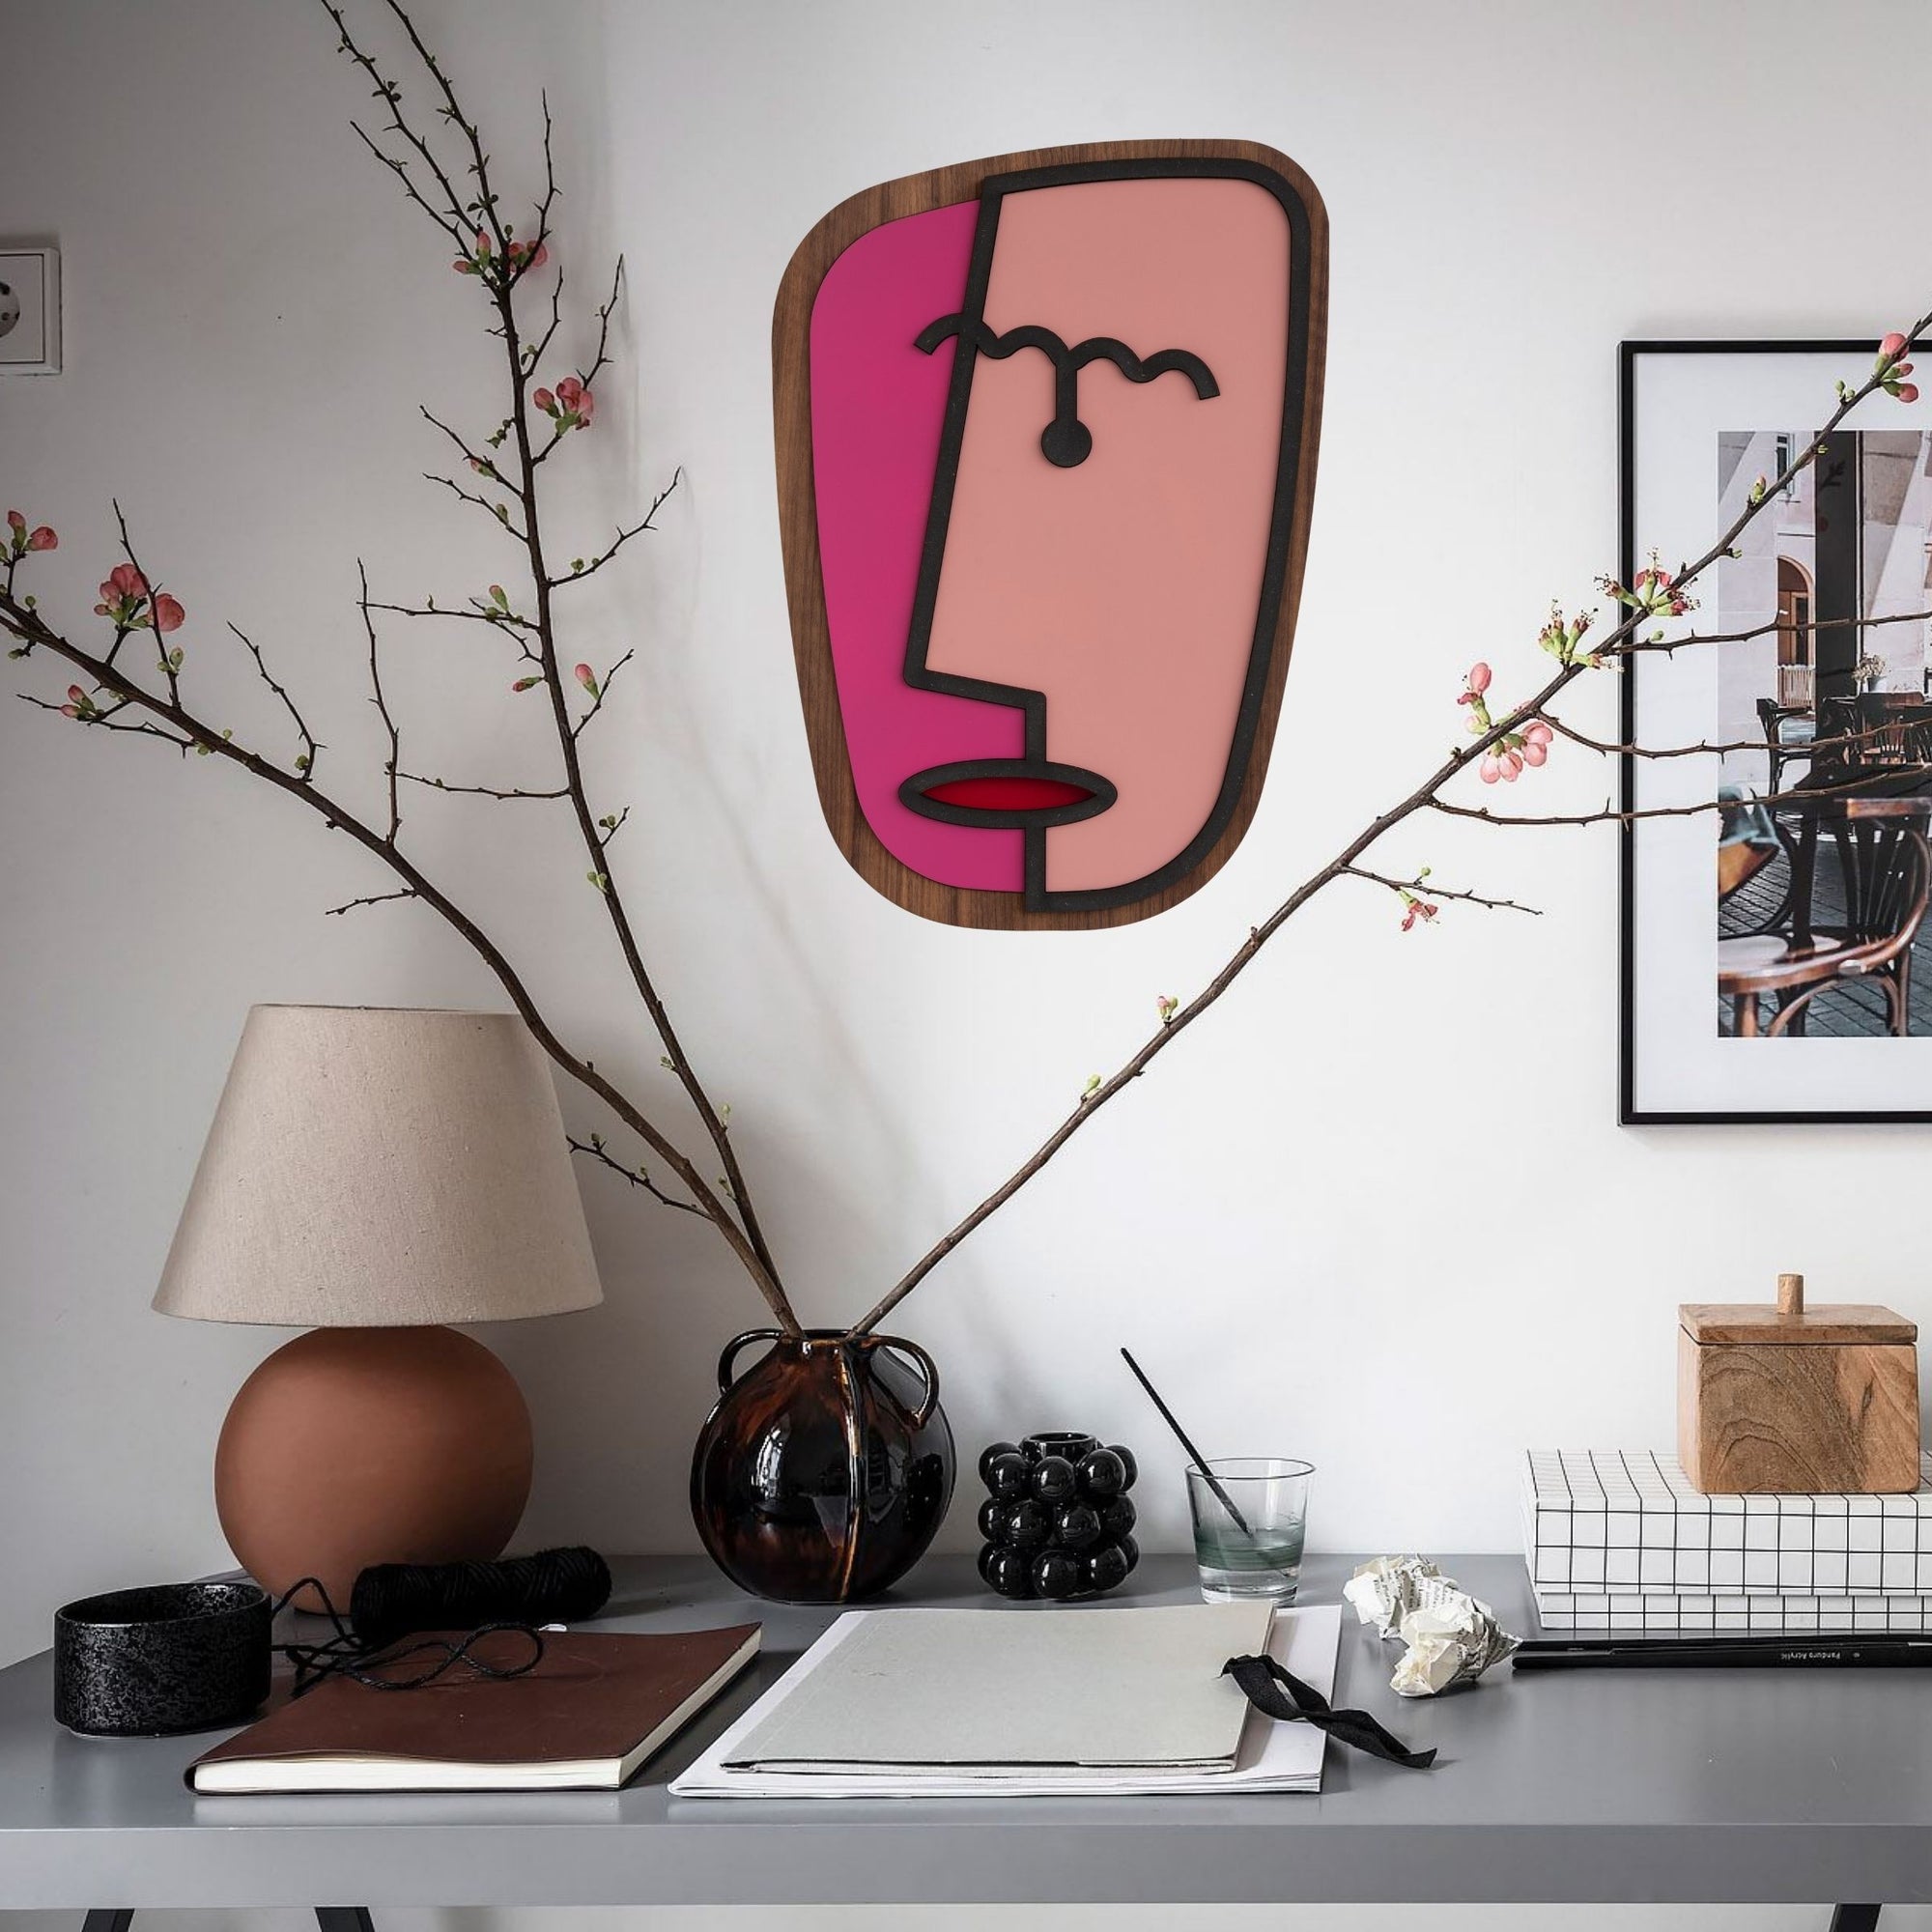 Your face and wall decor will shine through with these unique Picasso line drawings